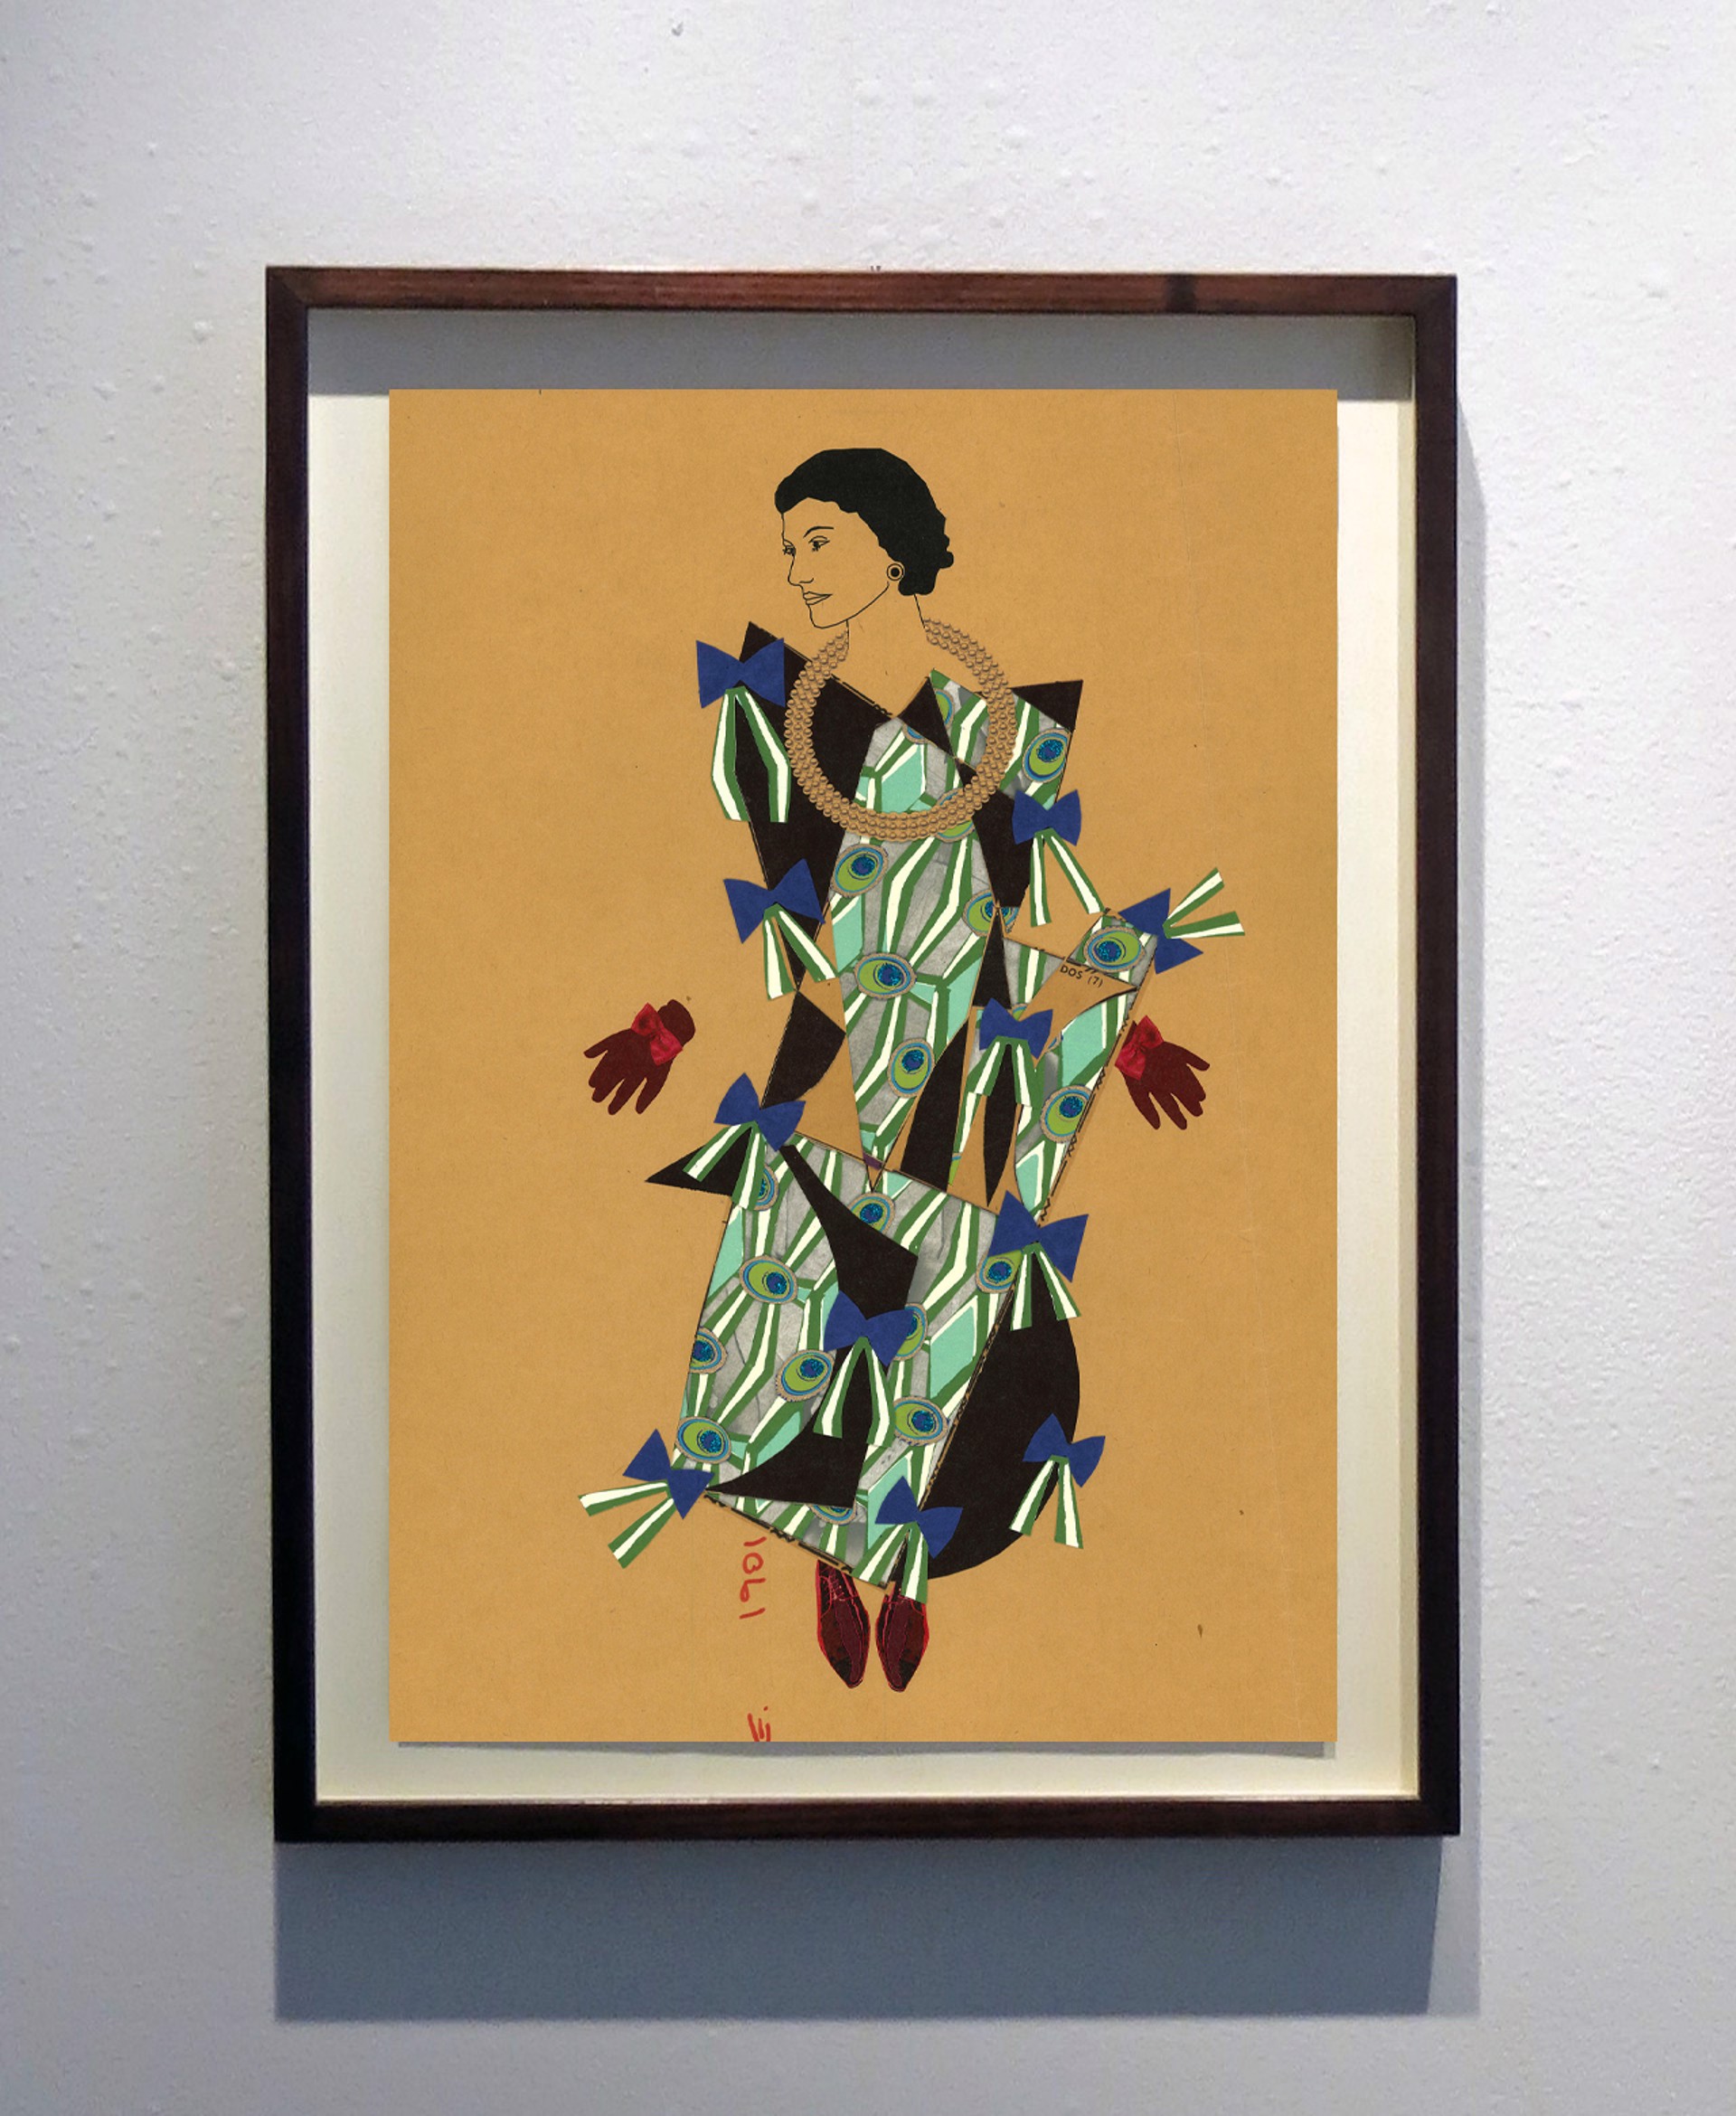 A Study on Coco n°3 by Hormazd Narielwalla